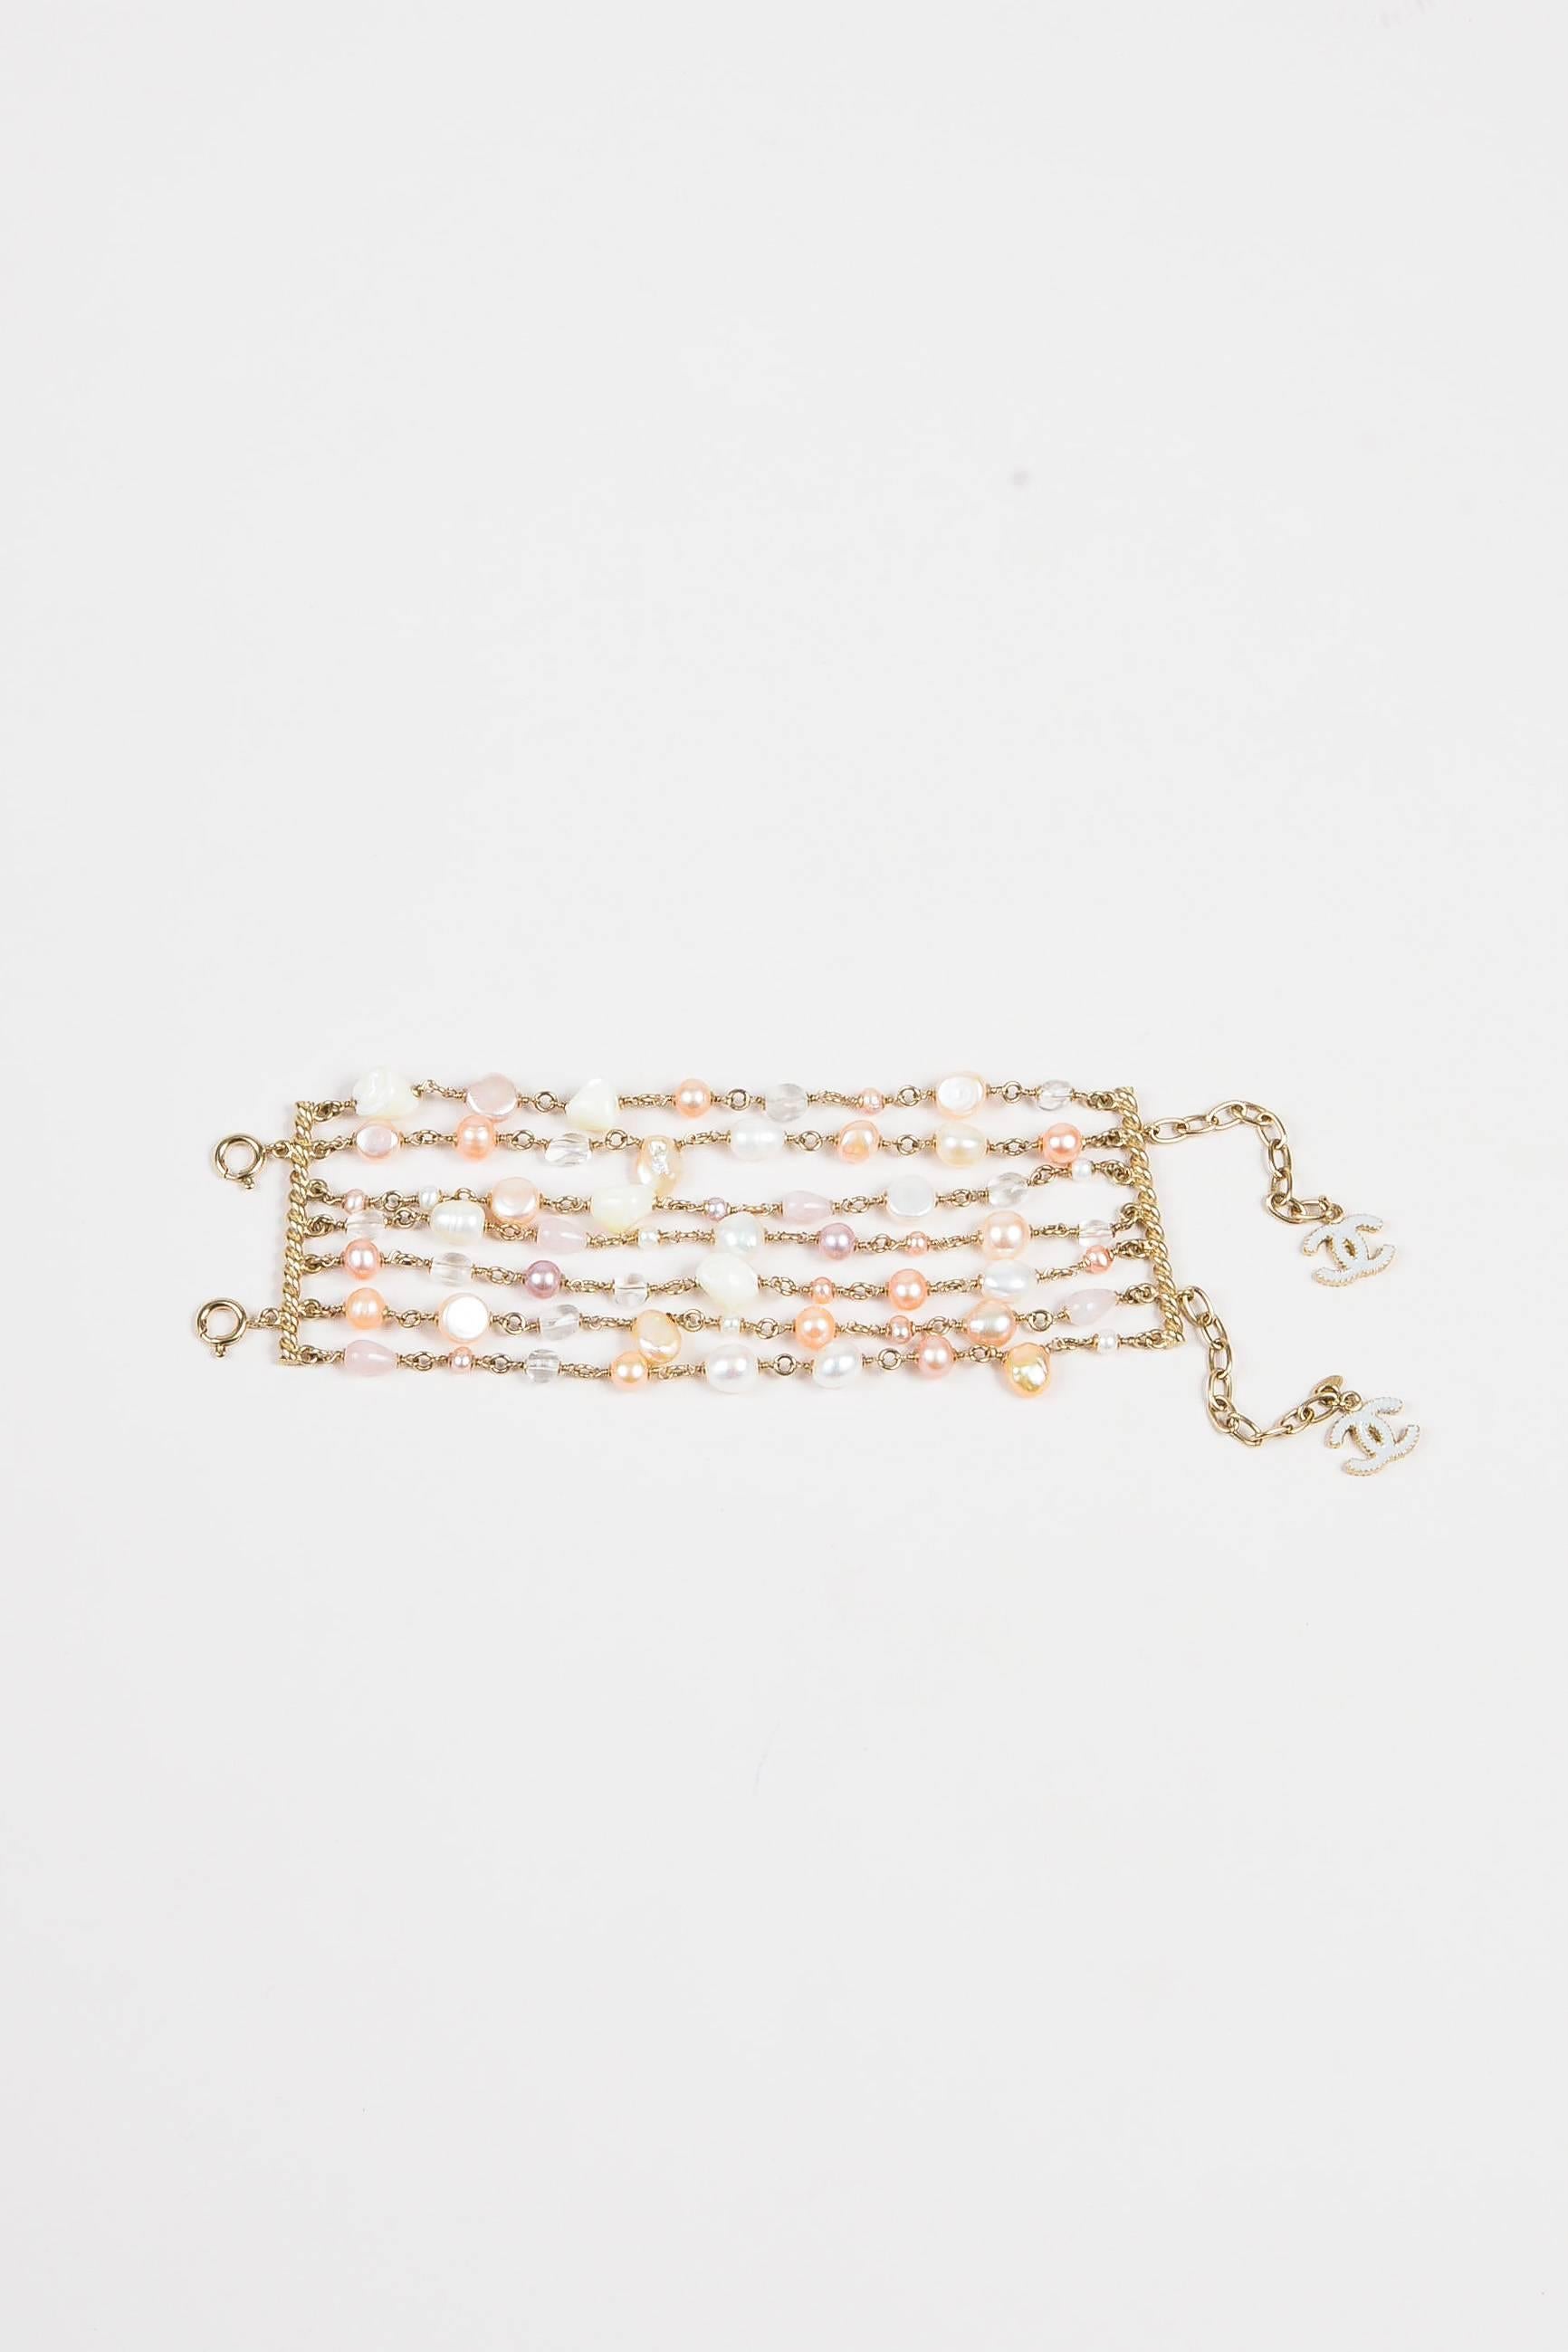 Retails at $2320. Luxuriously construction bracelet to add feminine statement to any look. From the spring 2012 collection. Gold-tone plated metal. Seven link strands with pastel colored faux pearls and glass beads. Links are attached to bars with